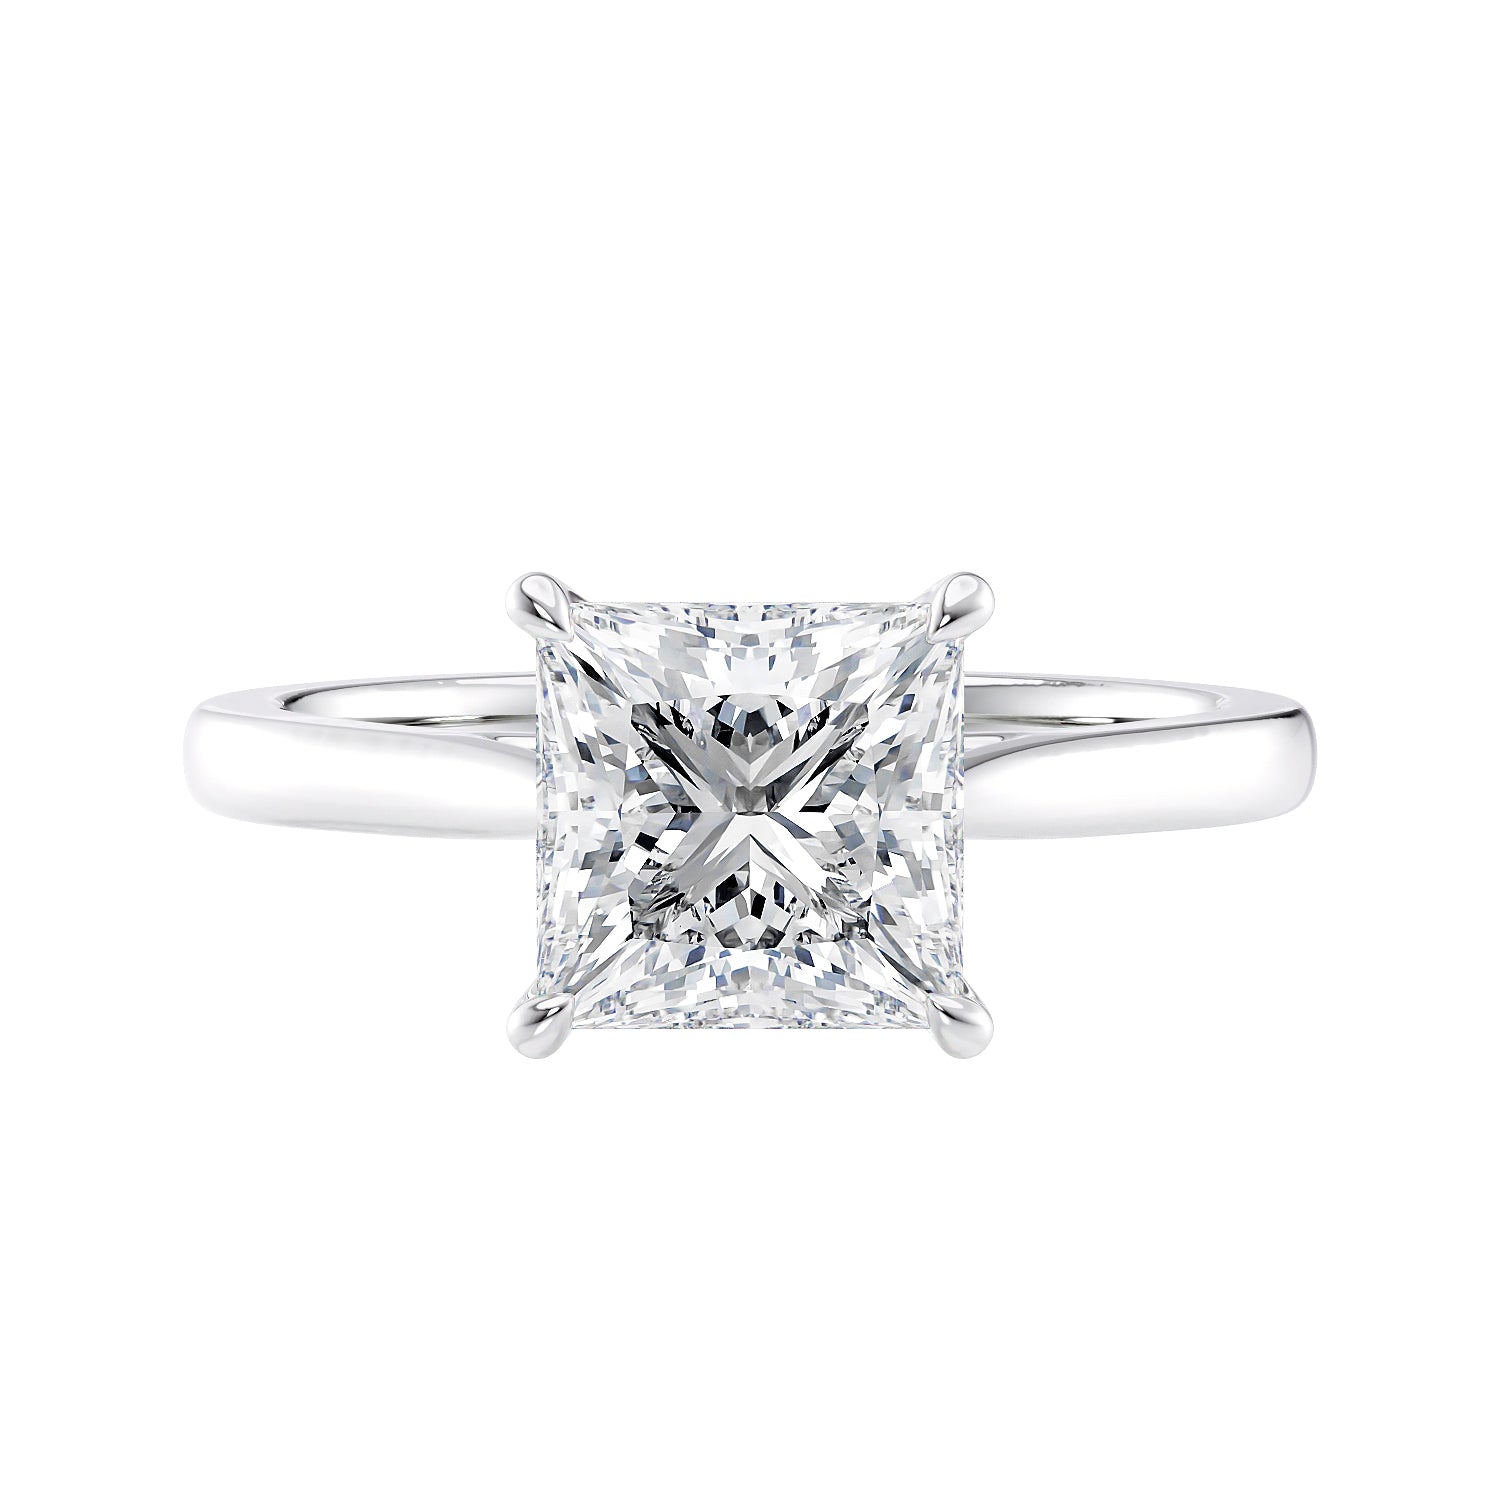 White gold princess cut solitaire diamond engagement ring front view.